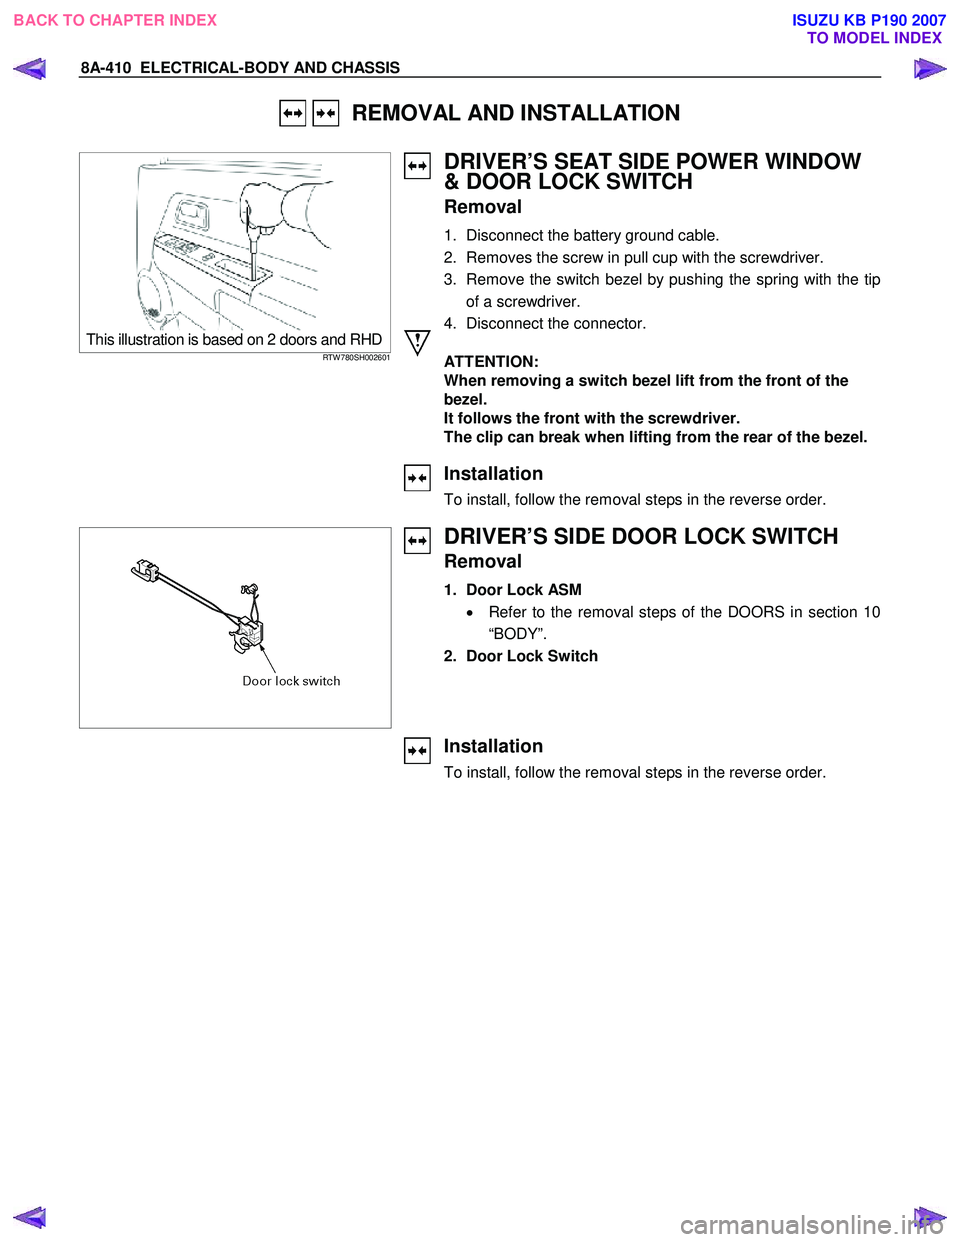 ISUZU KB P190 2007  Workshop Owners Guide 8A-410  ELECTRICAL-BODY AND CHASSIS 
   REMOVAL AND INSTALLATION 
 
  
 This illustration is based on 2 doors and RHDRTW 780SH002601   
  
 
 
 
 
 
 
 
DRIVER’S SEAT SIDE POWER WINDOW  
& DOOR LOCK